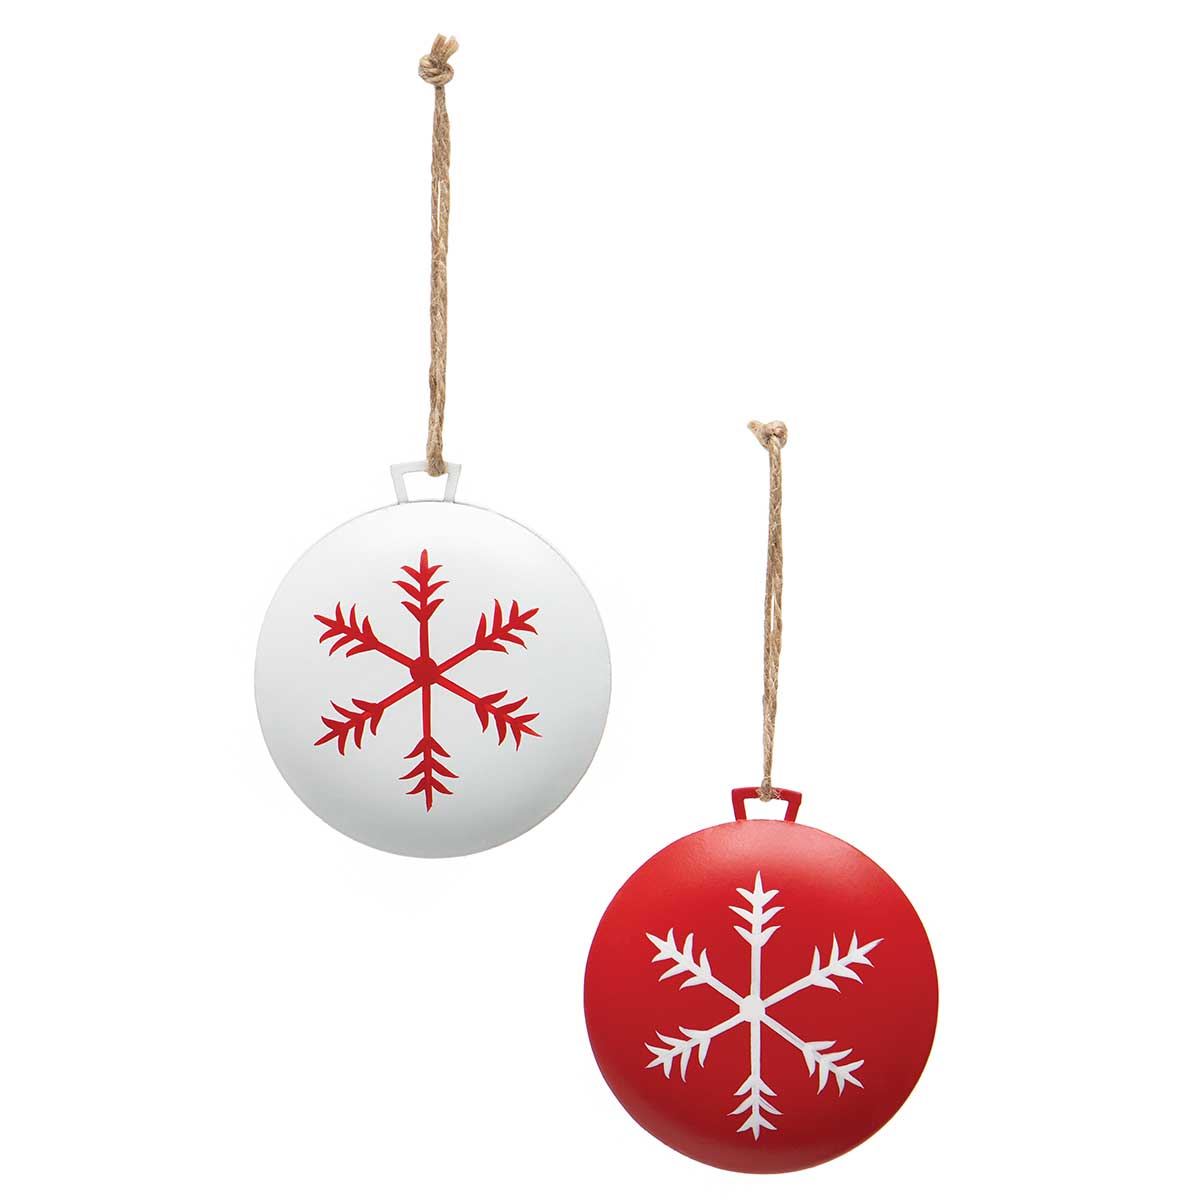 !ALPINE ROUND METAL ORNAMENT WITH SNOWFLAKE AND